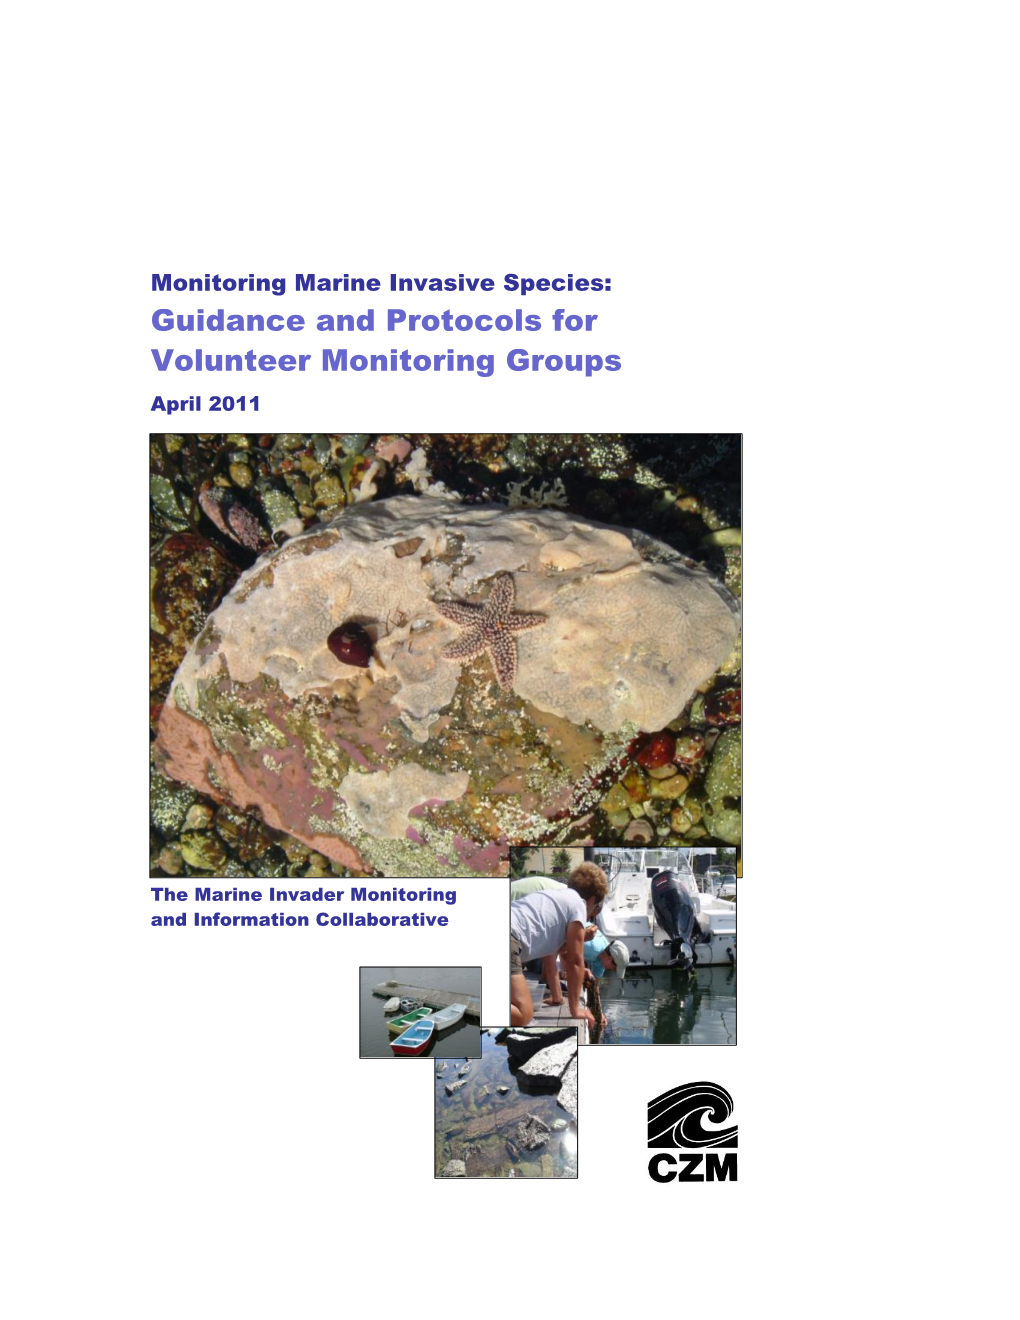 Monitoring for Marine Invasive Species: Guidance and Protocols